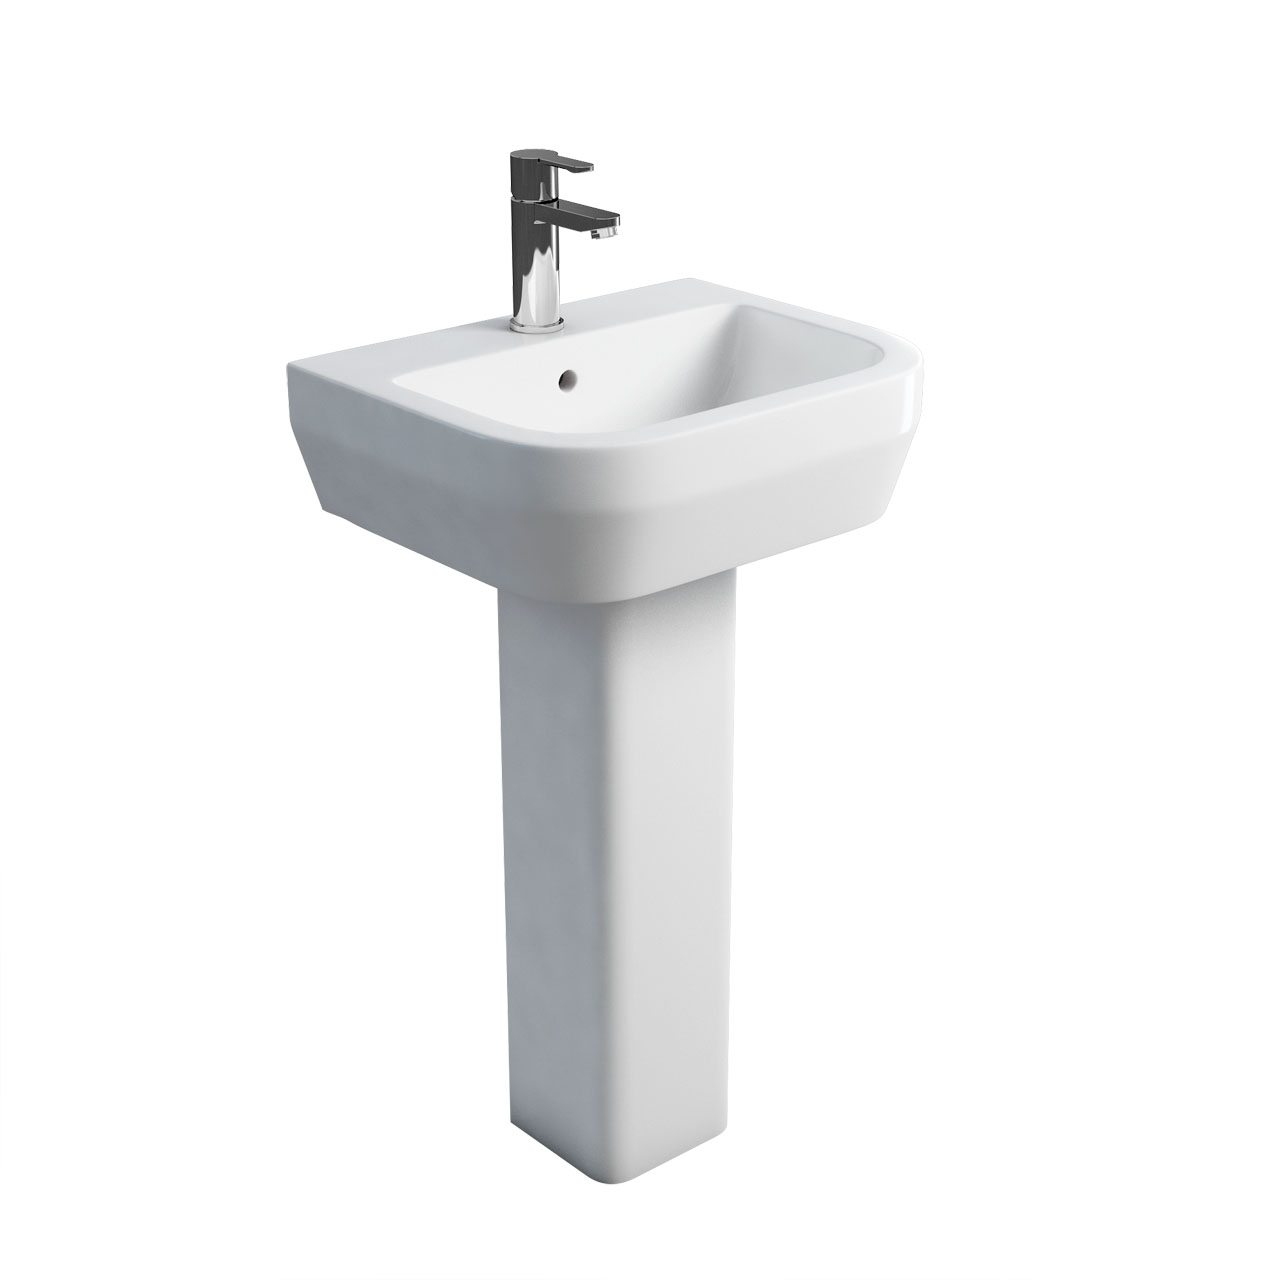 Curve S30 500 basin and square fronted pedestal